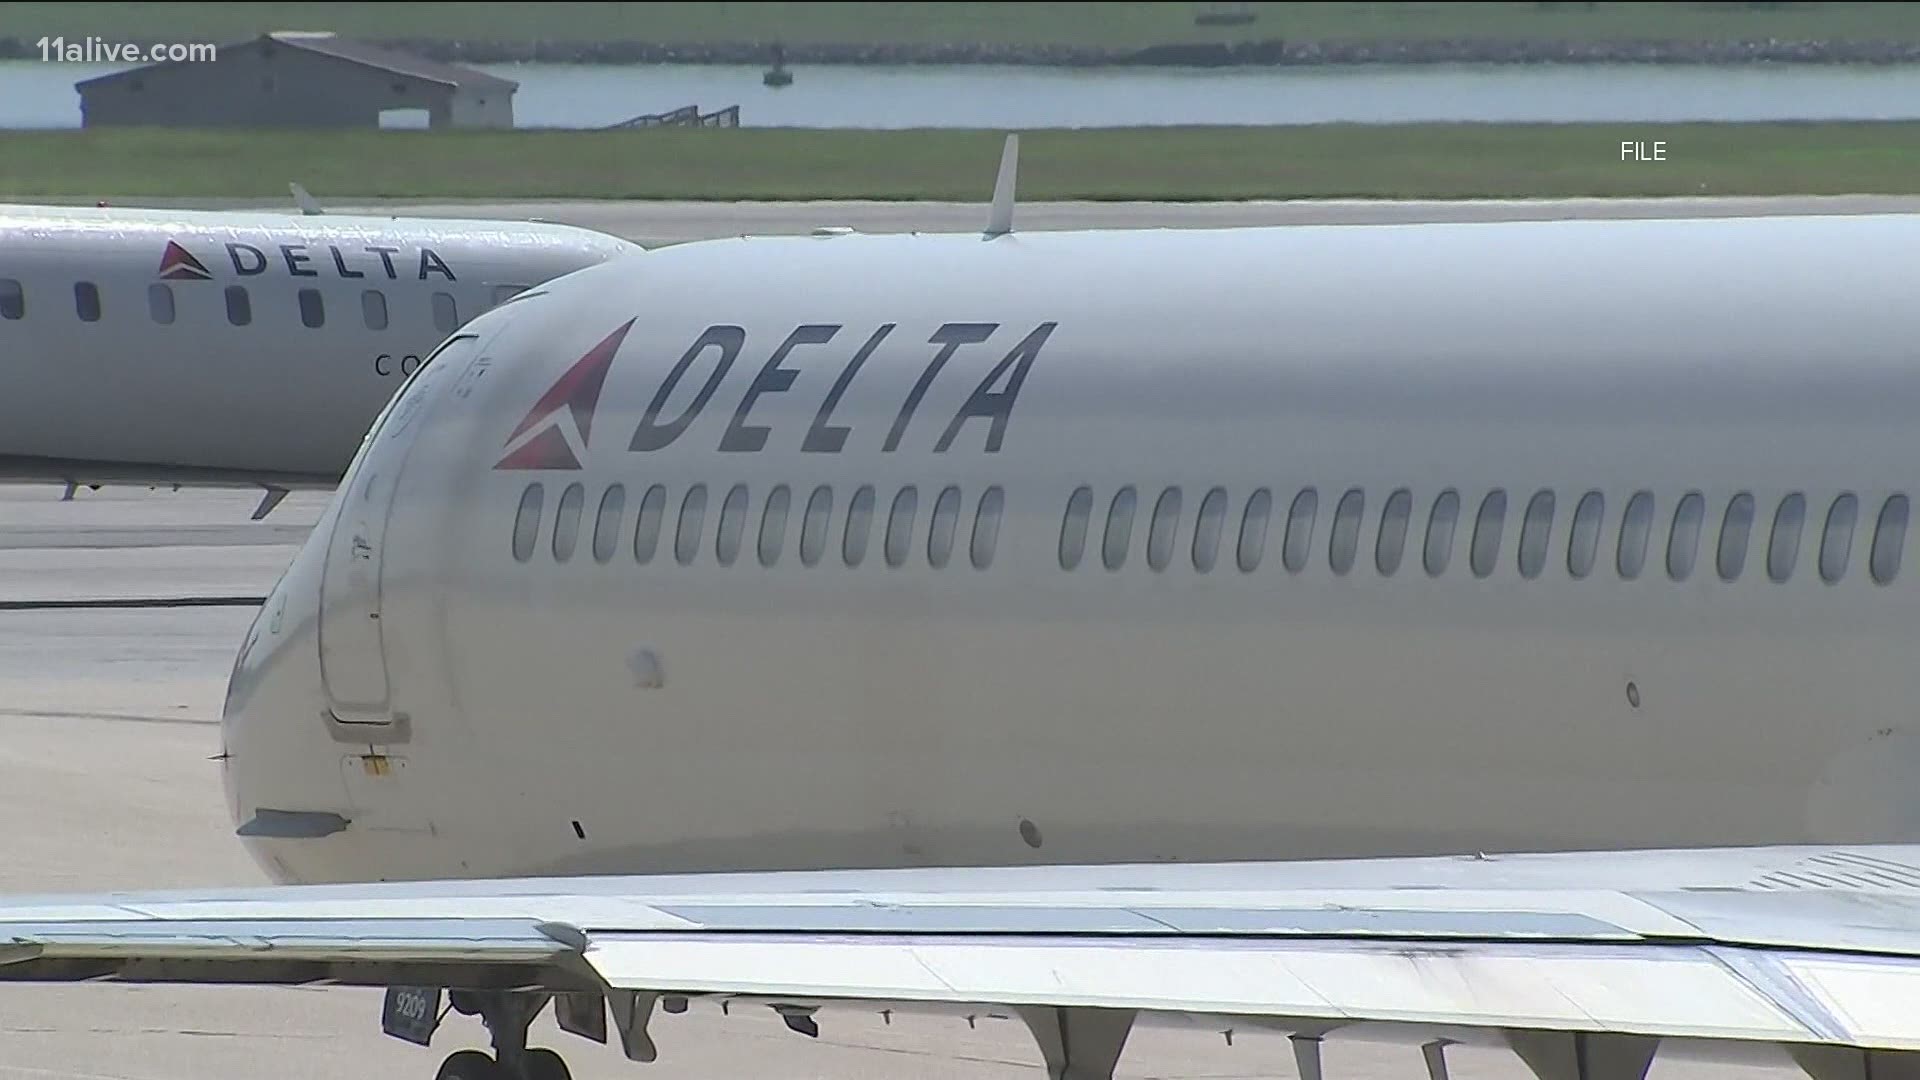 According to Delta, flight 2123 was re-routed to Salt Lake City. Delta said the flight landed safely 'without incident.'